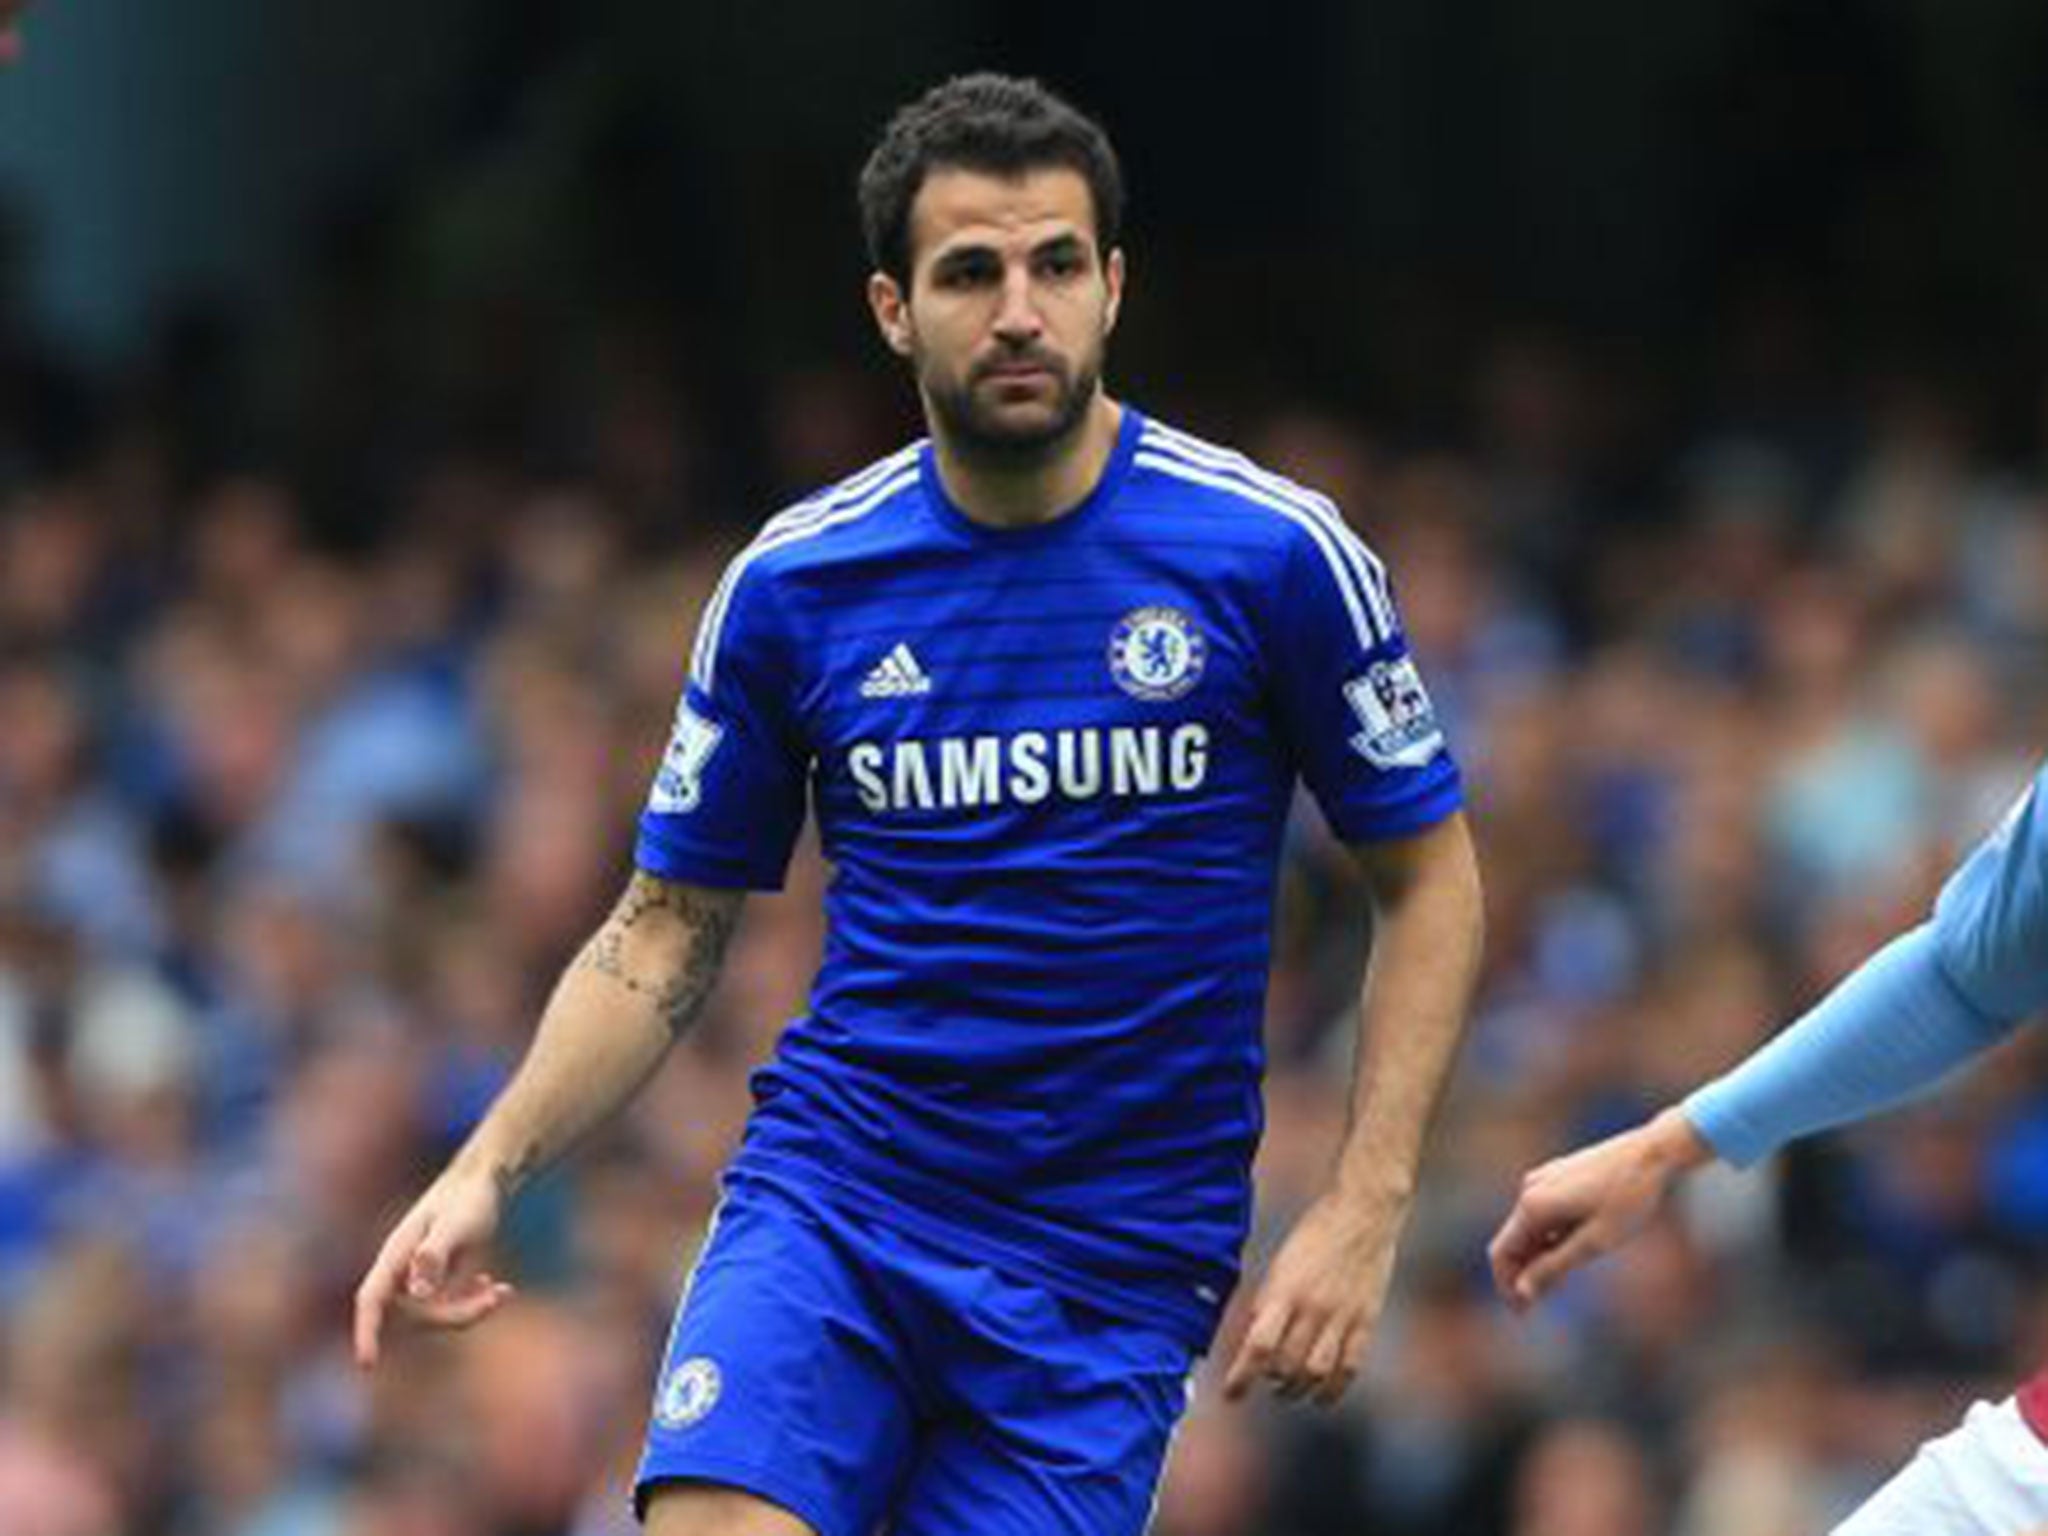 Midfielder Cesc Fabregas has proved the model professional since joining Chelsea